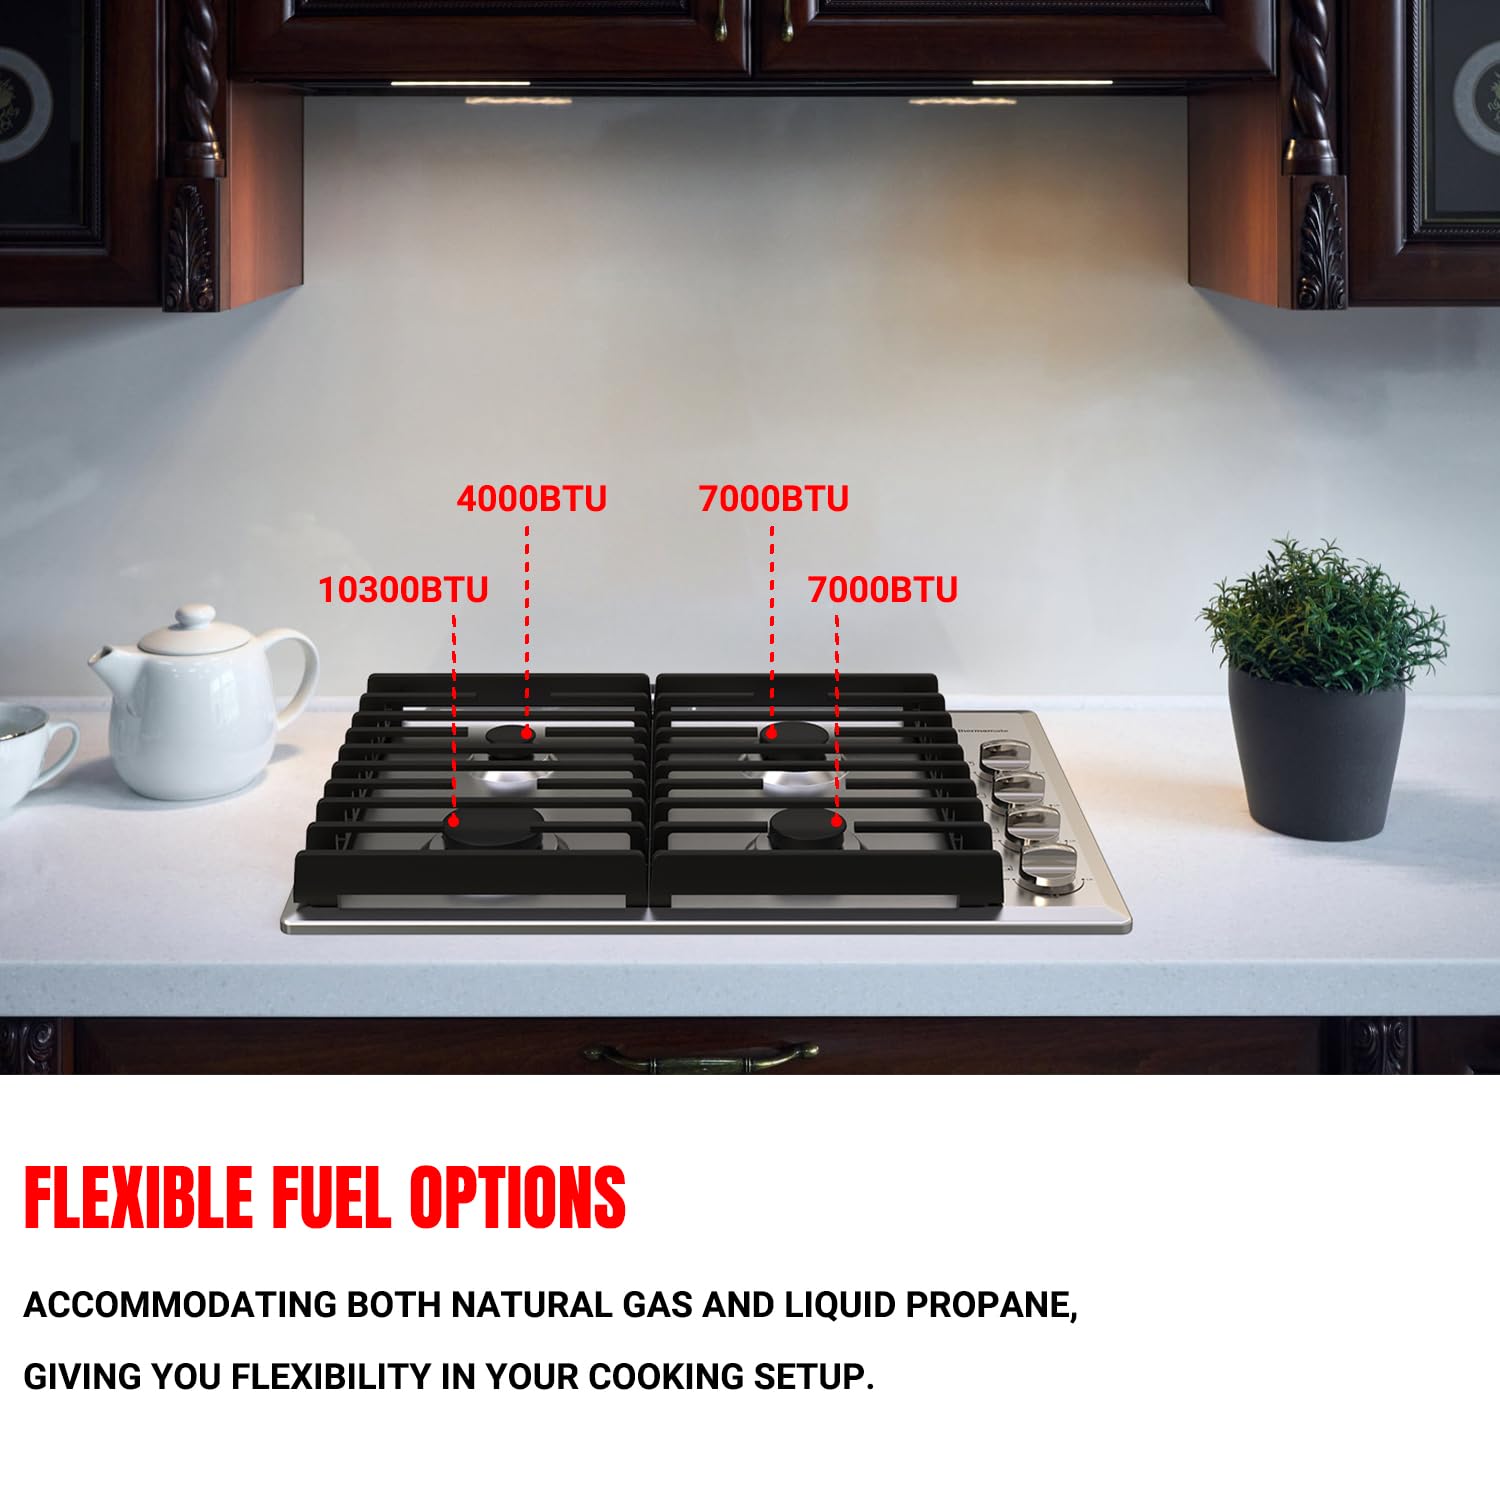 ACCOMMODATING BOTH NATURAL GAS AND LIQUID PROPANEGIVING YOU FLEXIBILITY IN YOUR COOKING SETUP.